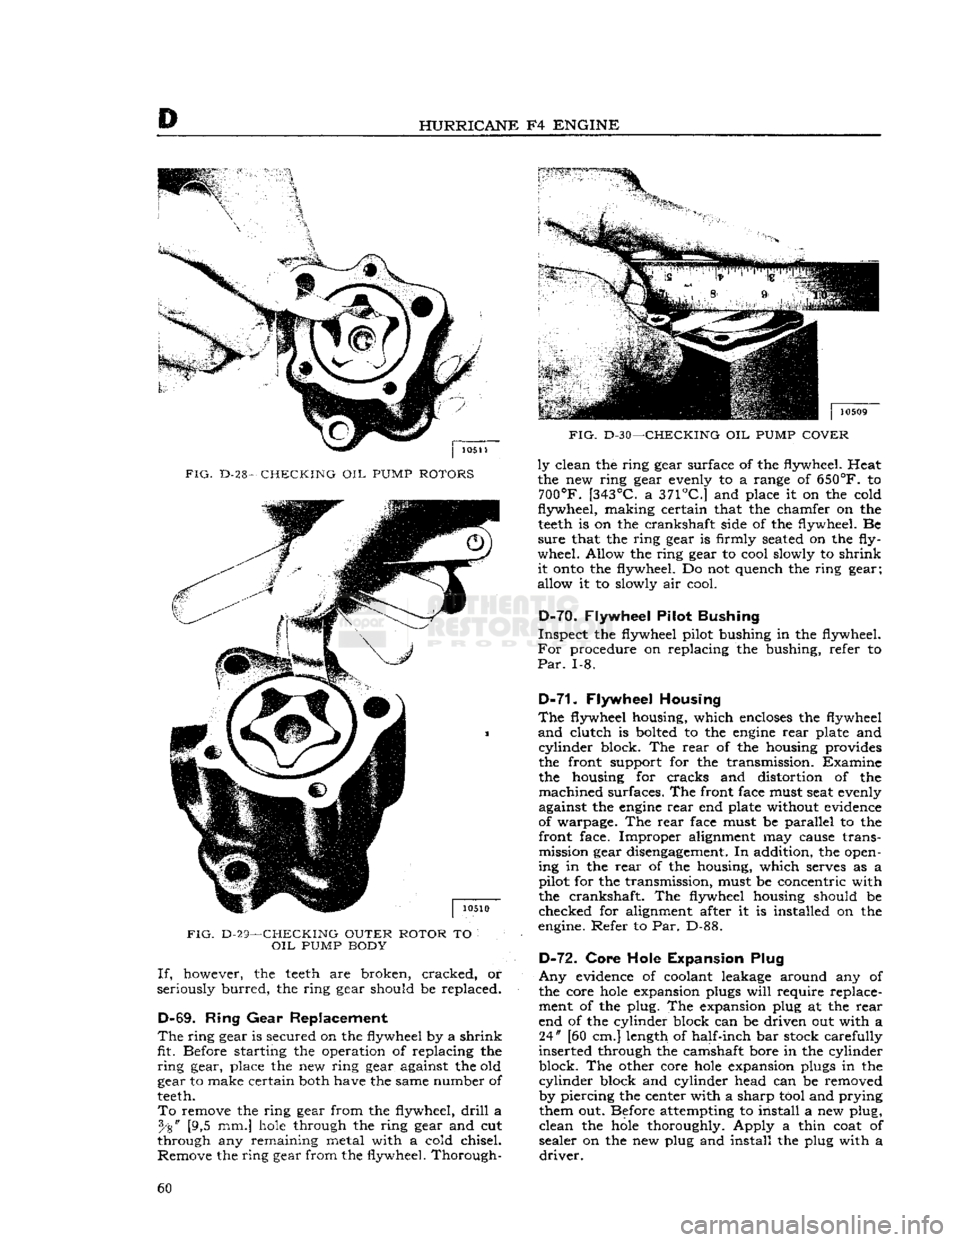 JEEP CJ 1953  Service Manual 
HURRICANE
 F4
 ENGINE 

FIG.
 D-28-
 CHECKING
 OIL
 PUMP
 ROTORS 

FIG.
 D-29—CHECKING OUTER ROTOR
 TO 
 OIL
 PUMP
 BODY If,
 however, the
 teeth
 are broken, cracked, or 
seriously
 burred,
 the r